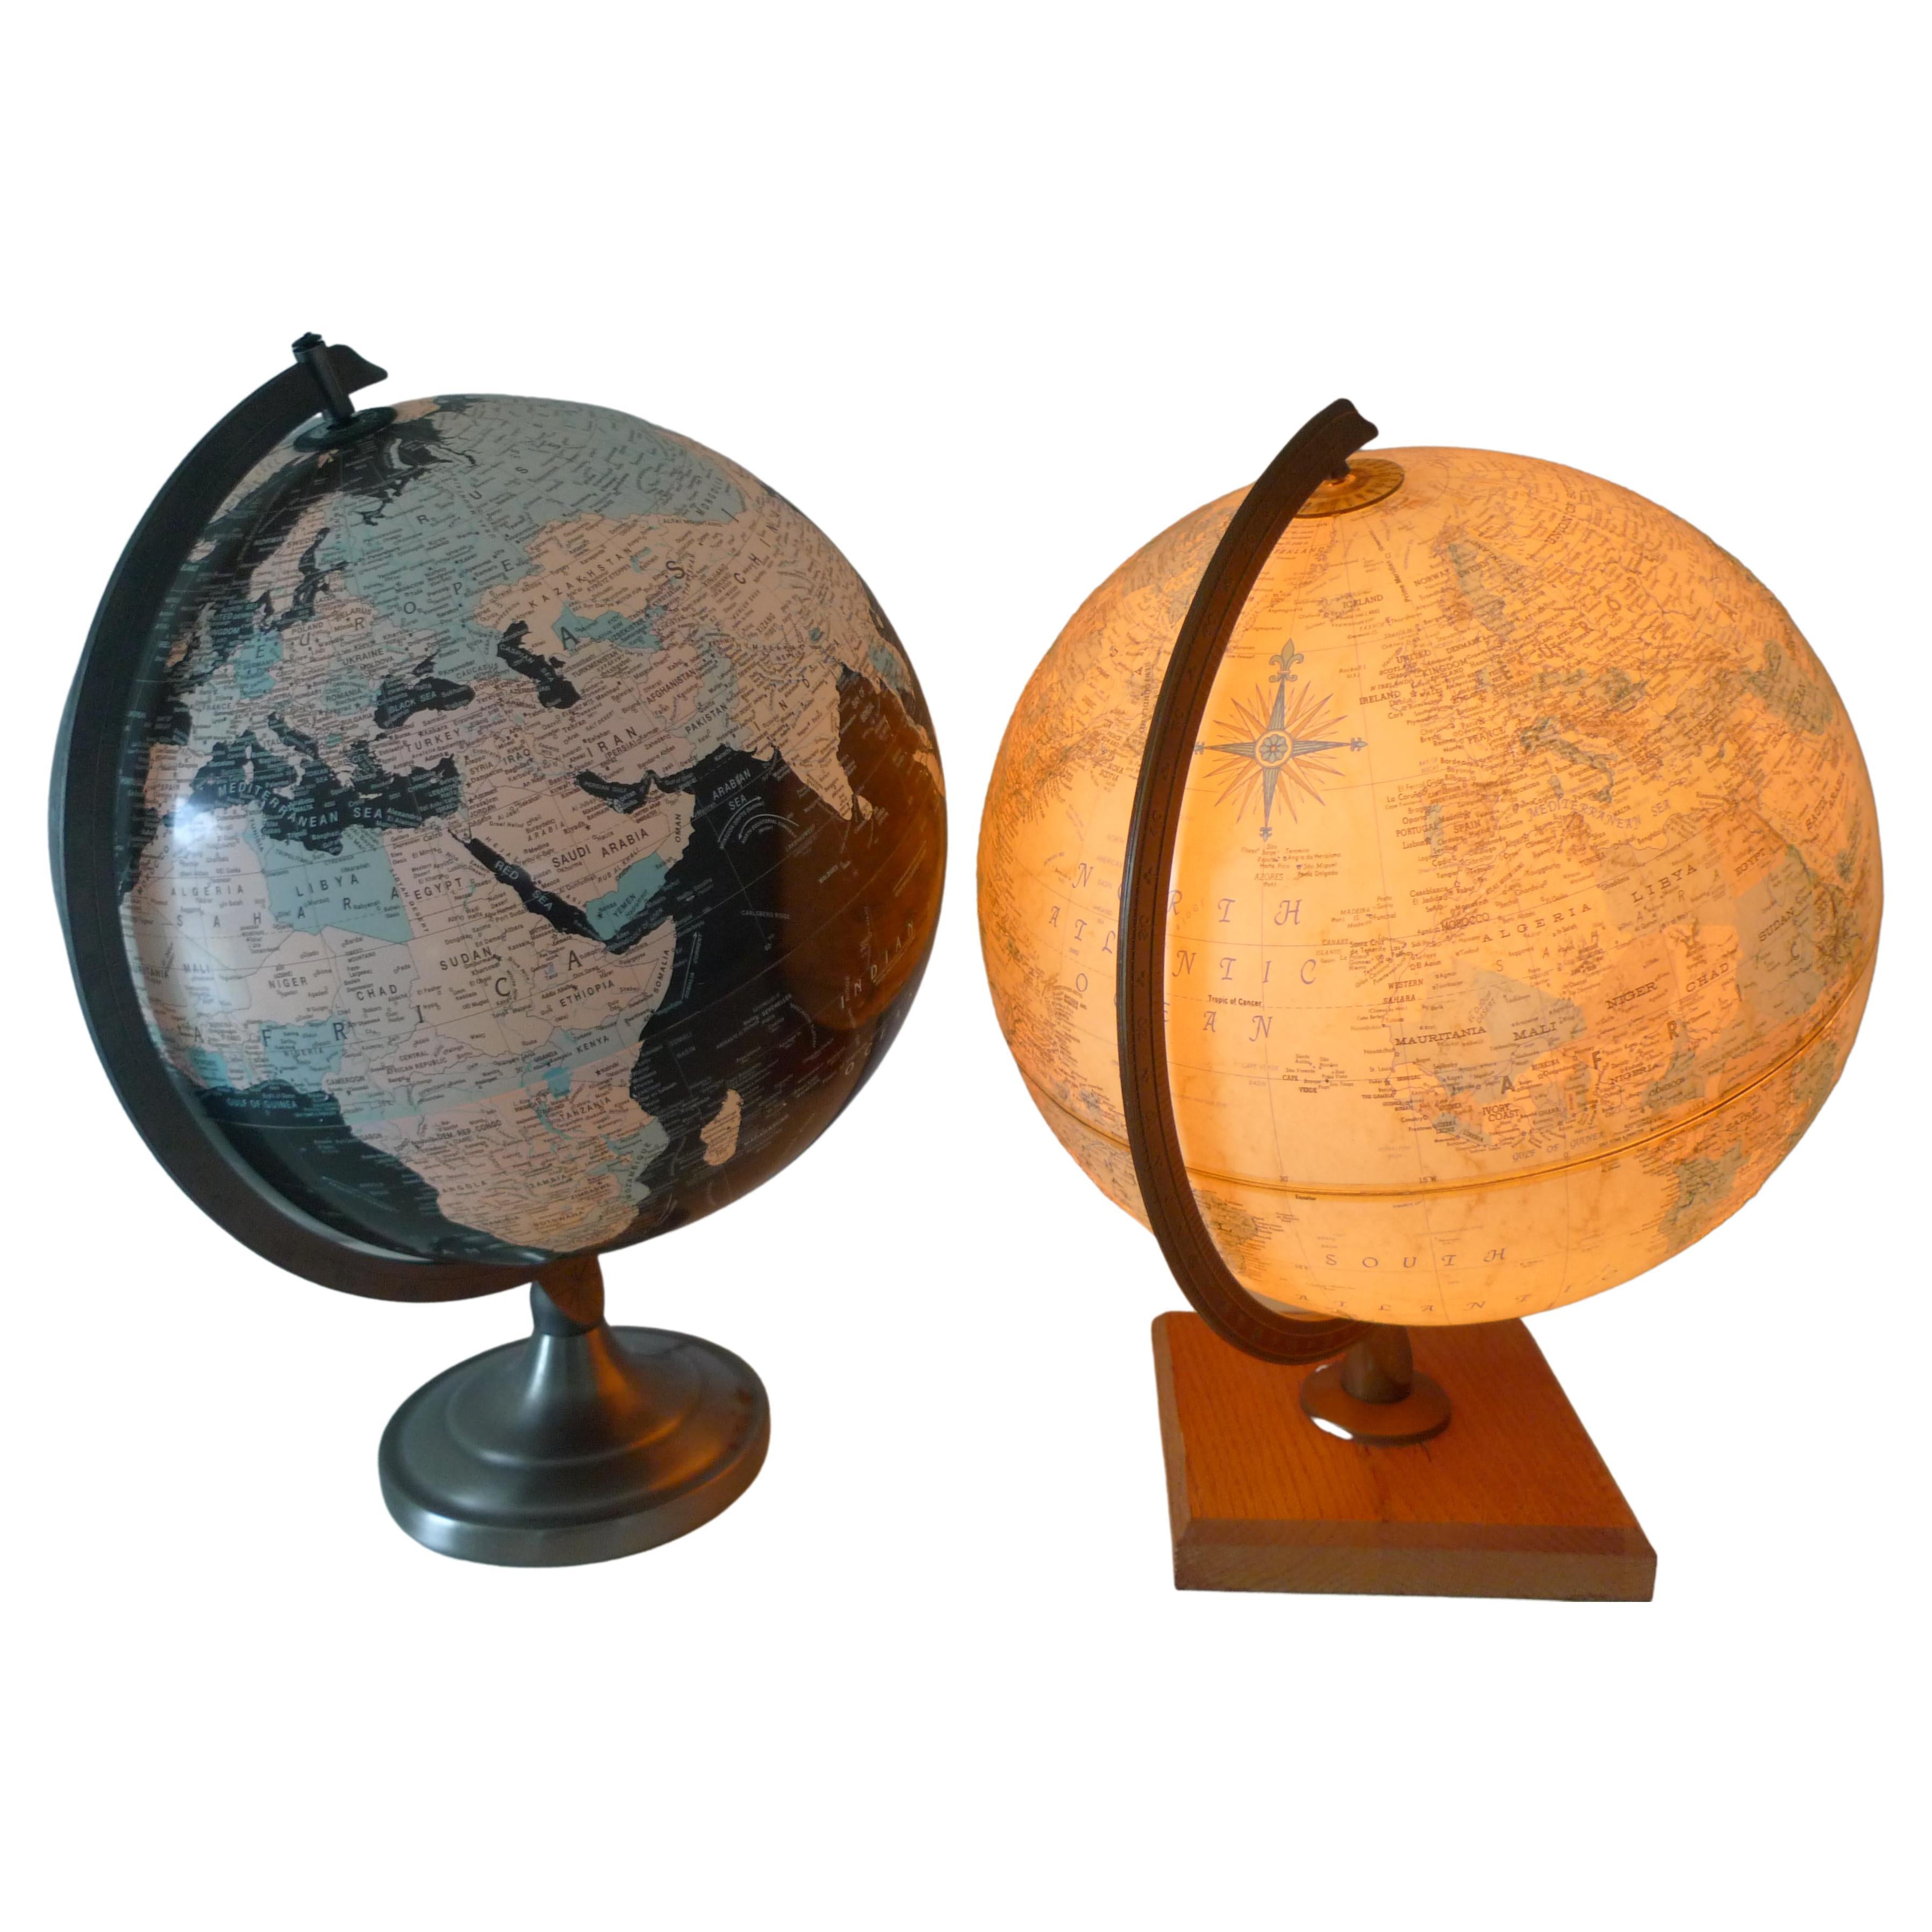 Globes, an illuminated pair: World Premier and Scanglobe by Replogle. 